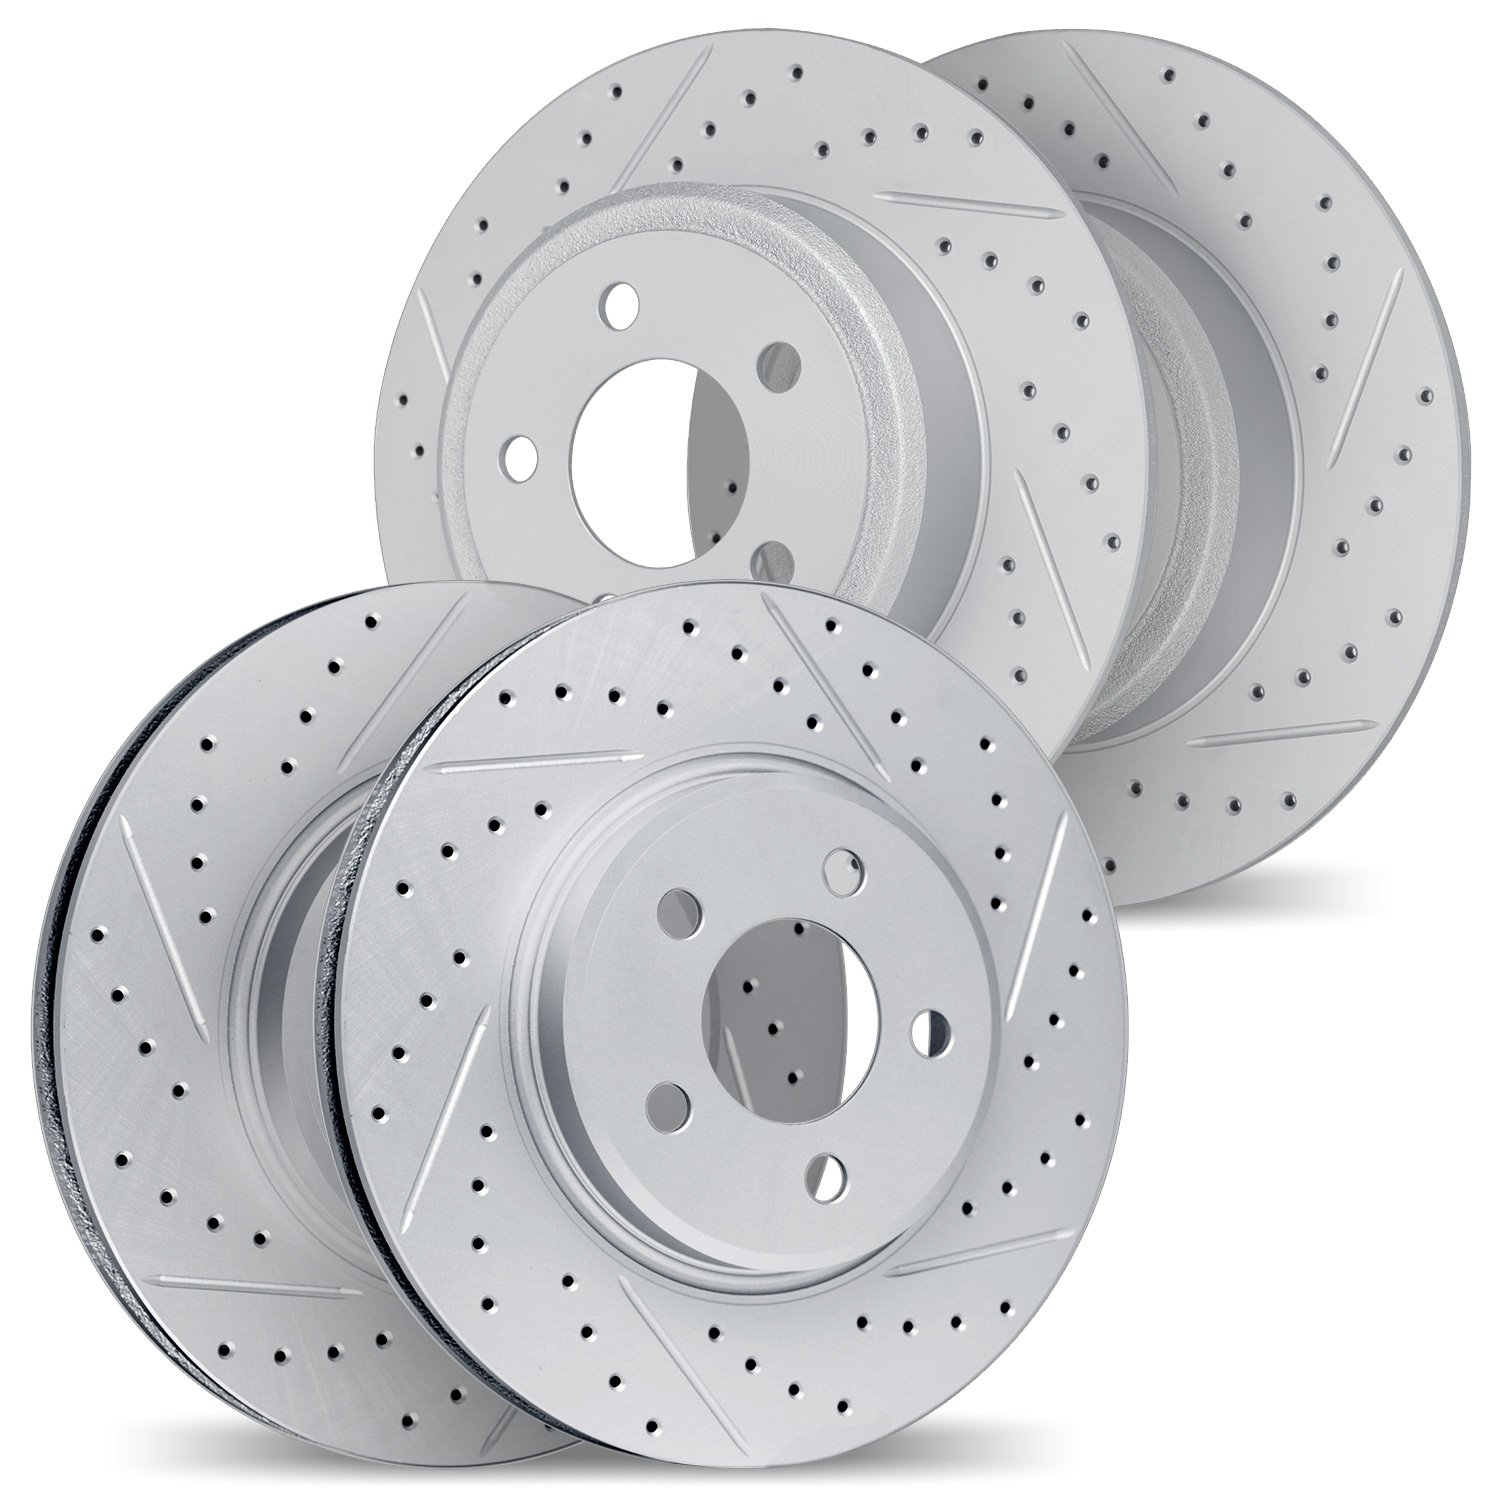 2004-03063 Geoperformance Drilled/Slotted Brake Rotors, 2011-2012 Kia/Hyundai/Genesis, Position: Front and Rear